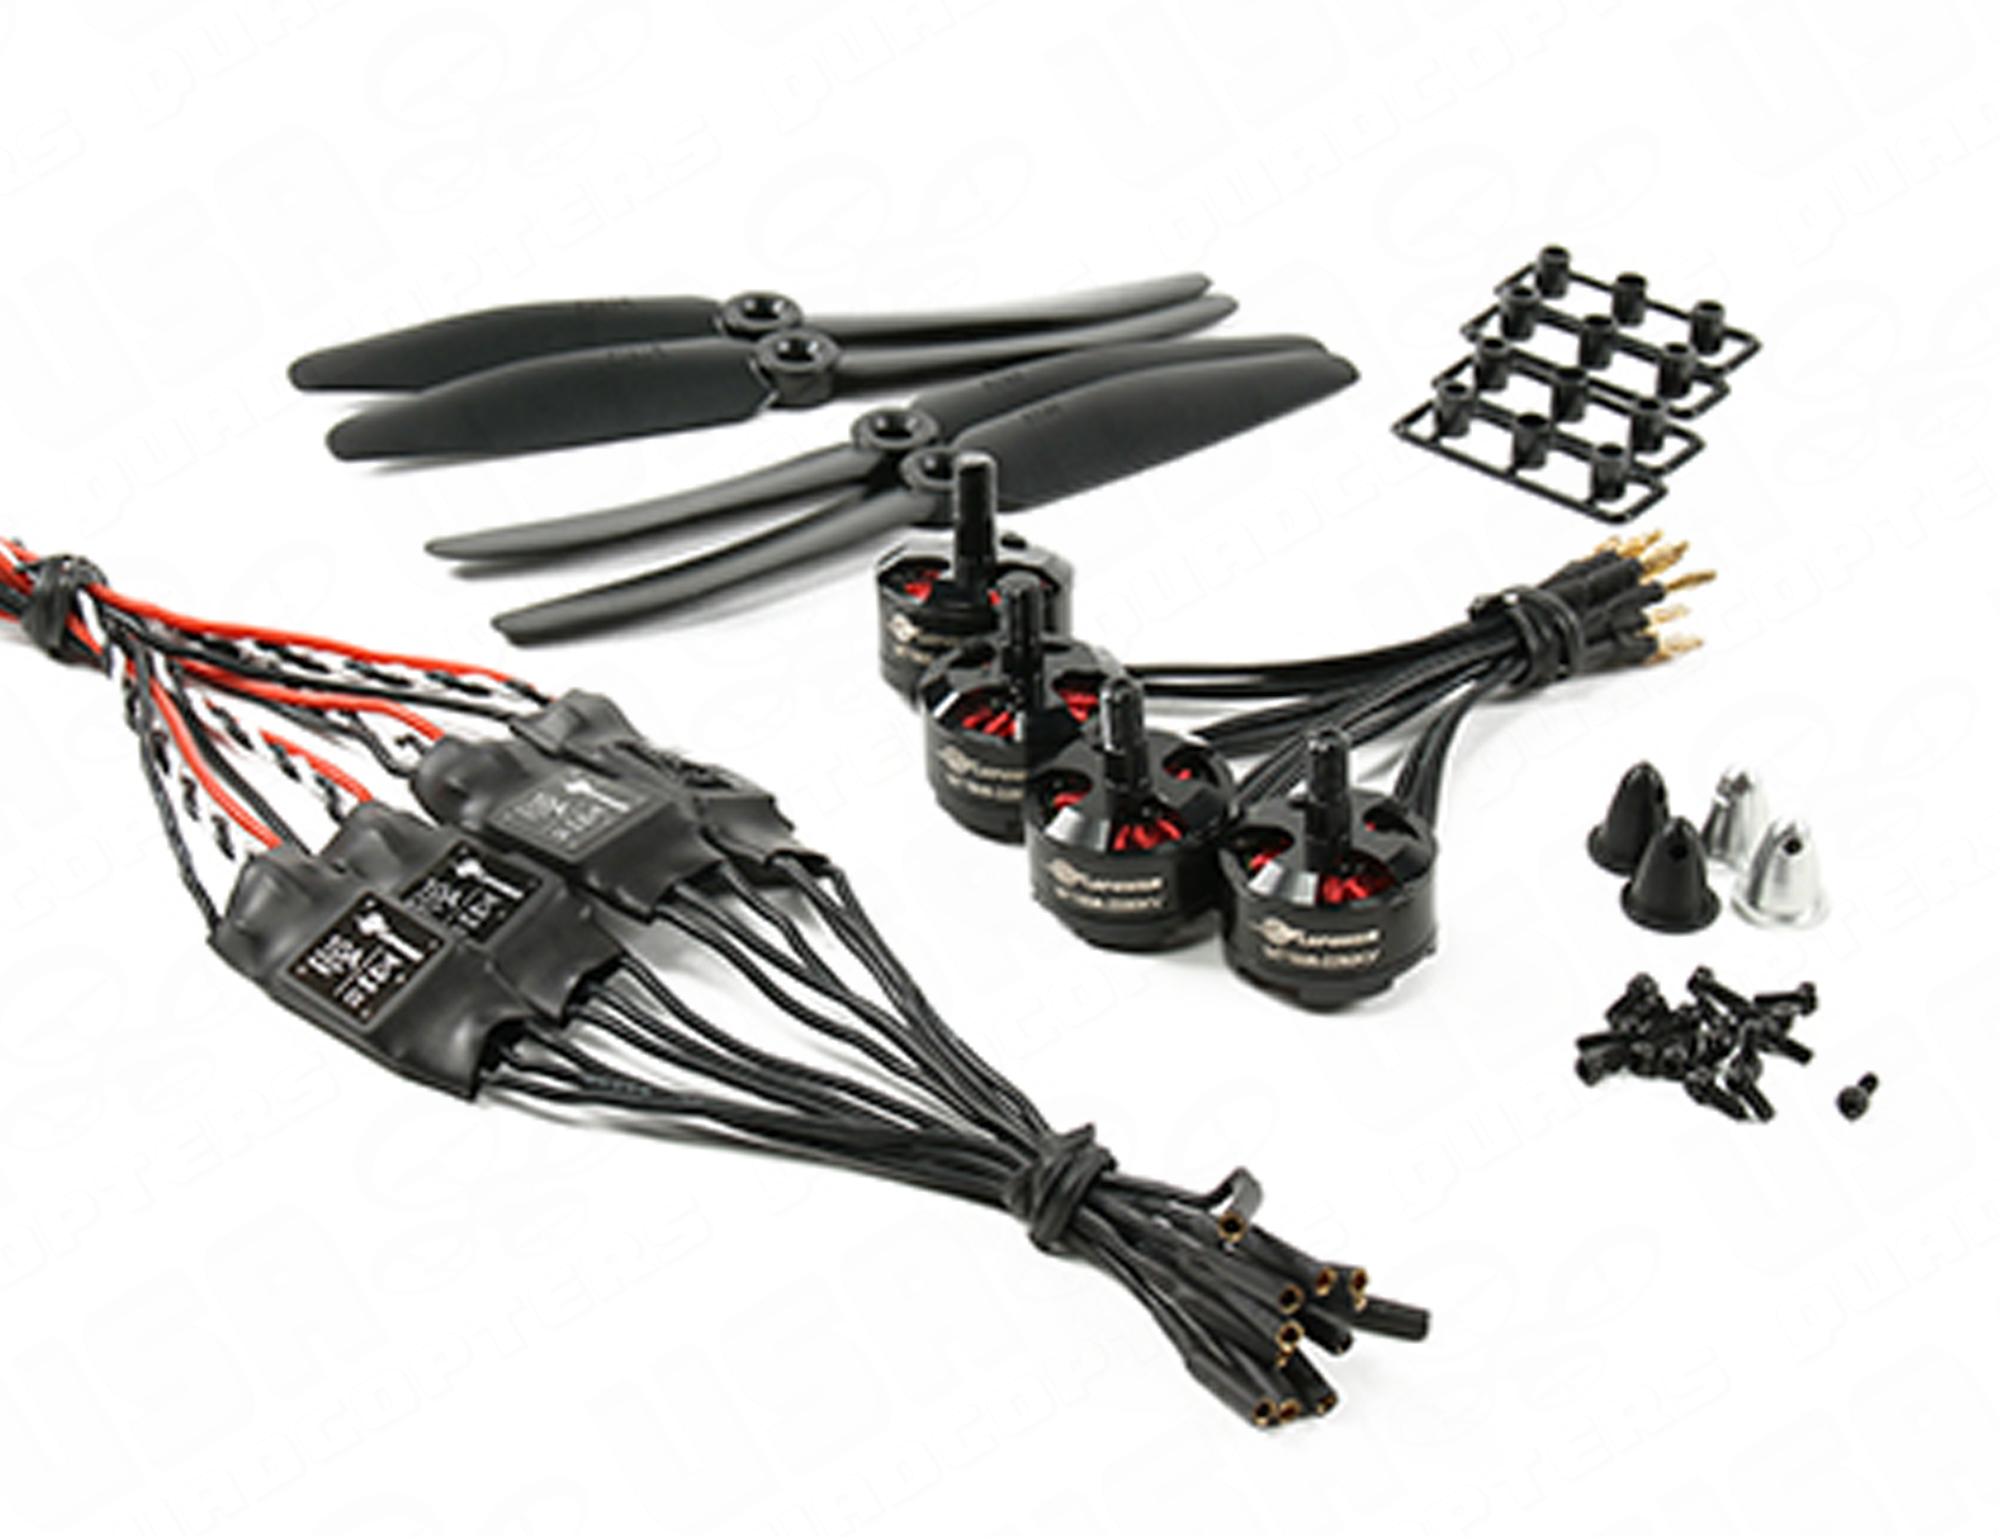 LDPower 250 Race-Spec Power System 1806-3100kv Motors with 10A ESCs and 5x3 Propellers